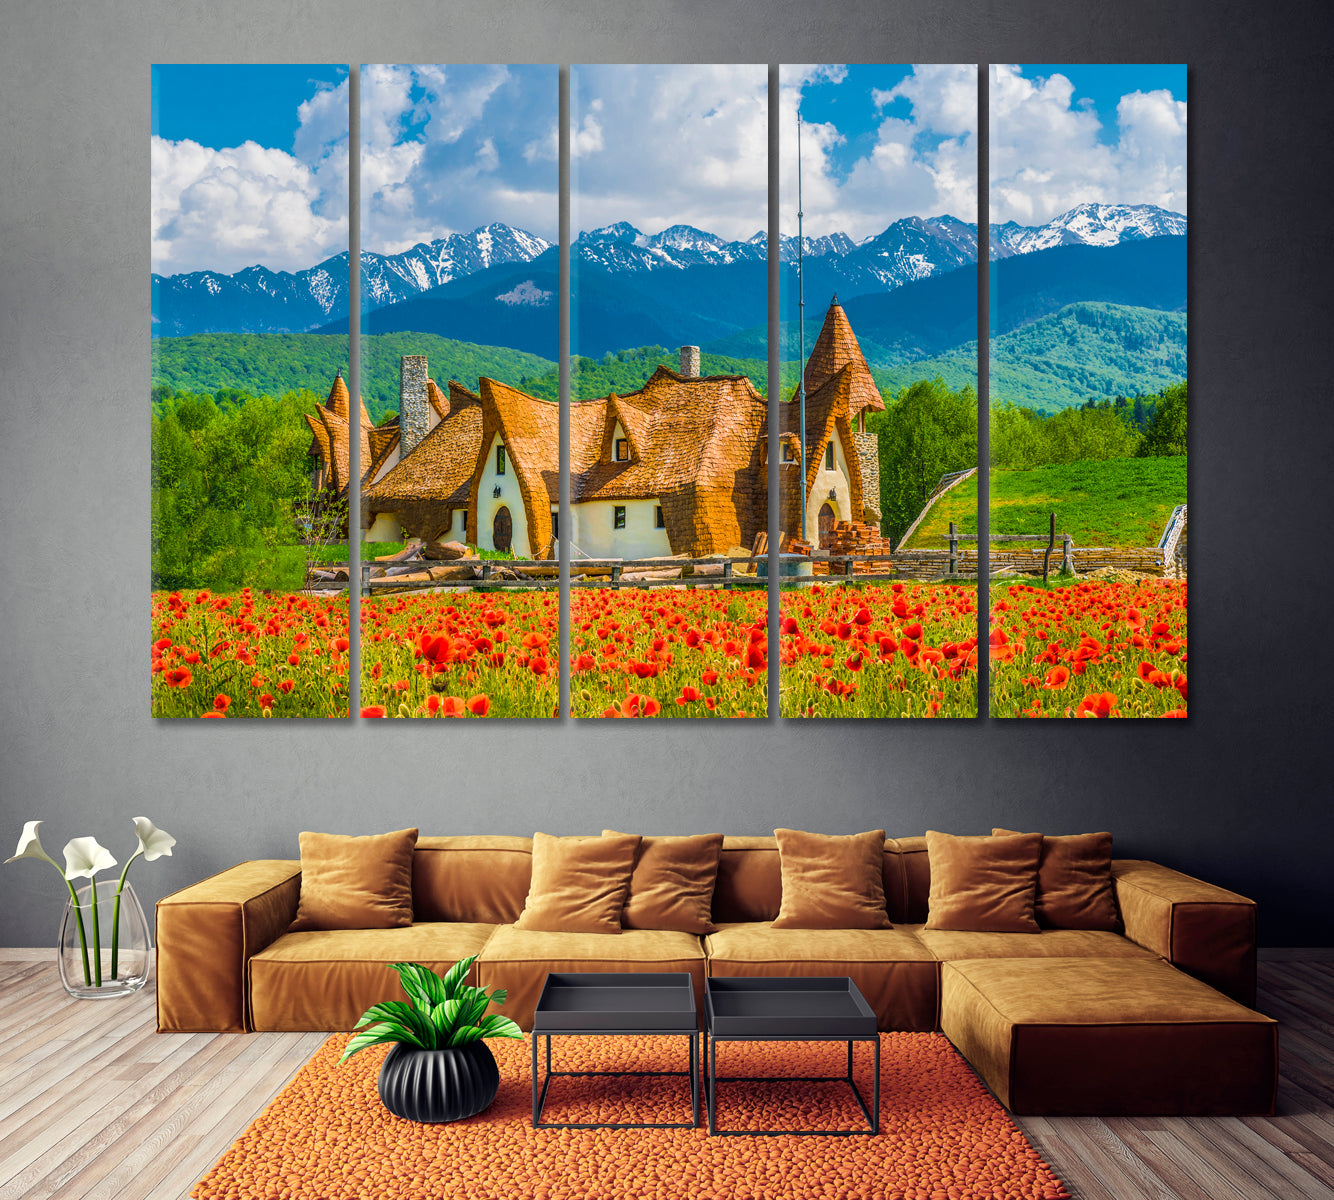 Clay Castle Valley Of Fairies Romania Canvas Print ArtLexy 5 Panels 36"x24" inches 